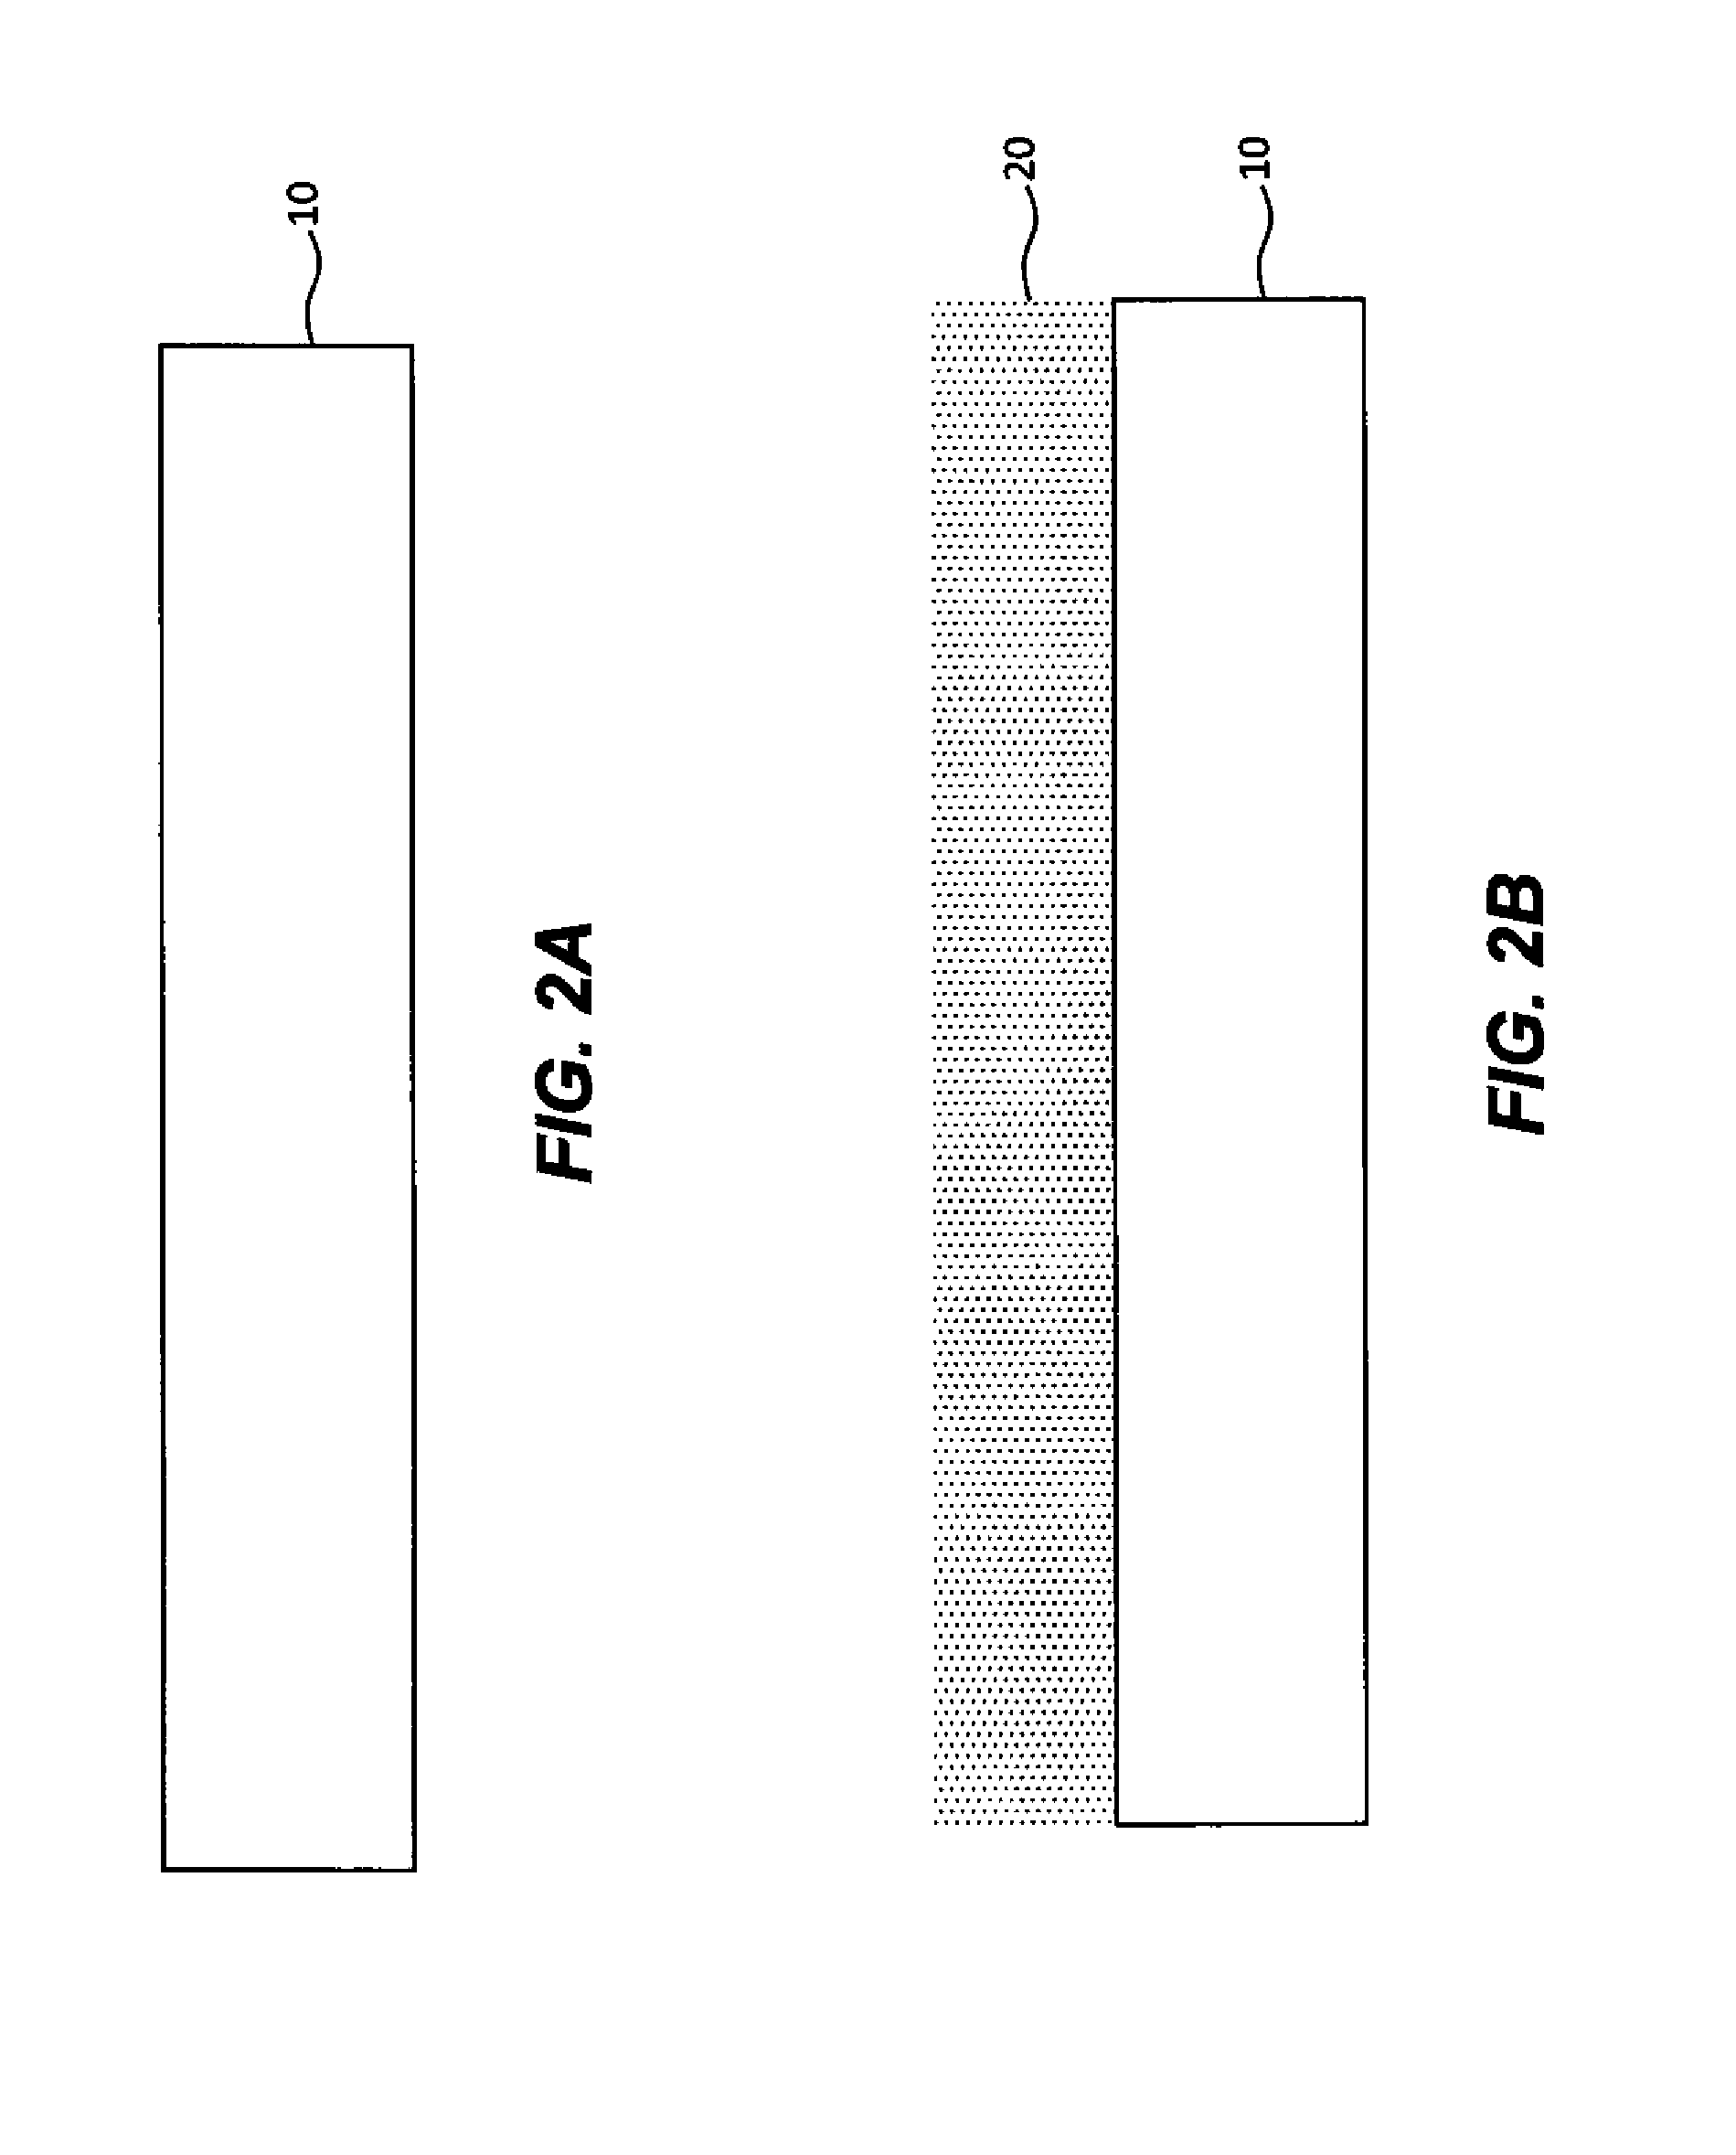 Preparation of articles with conductive micro-wire pattern